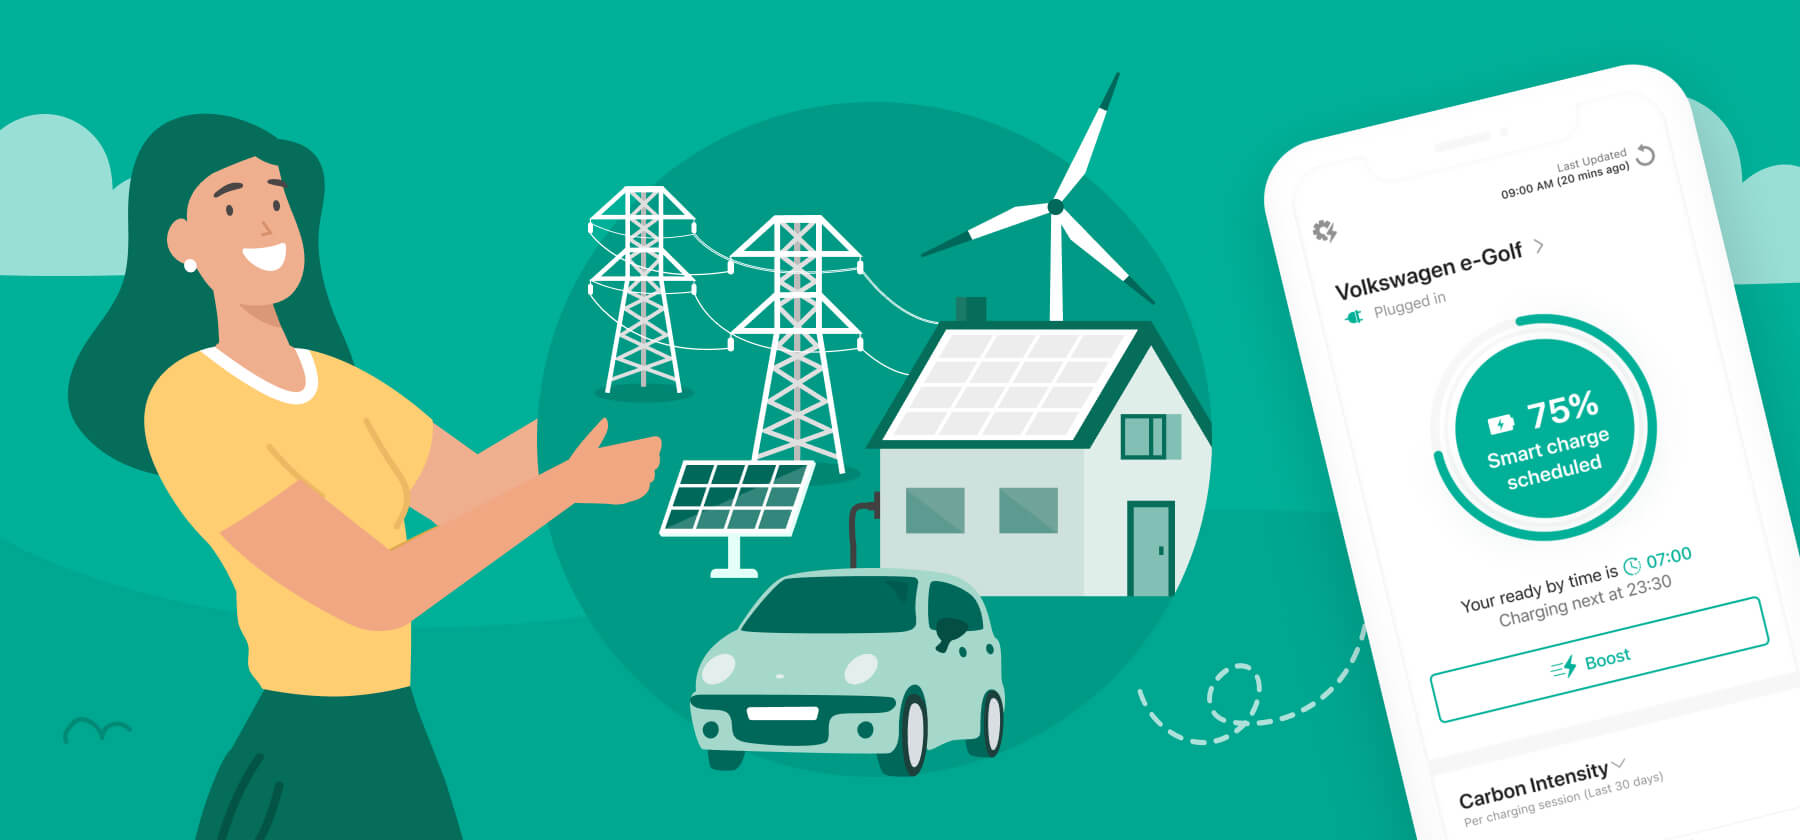 meet-gridshift-a-new-app-from-silicon-valley-clean-energy-tesla